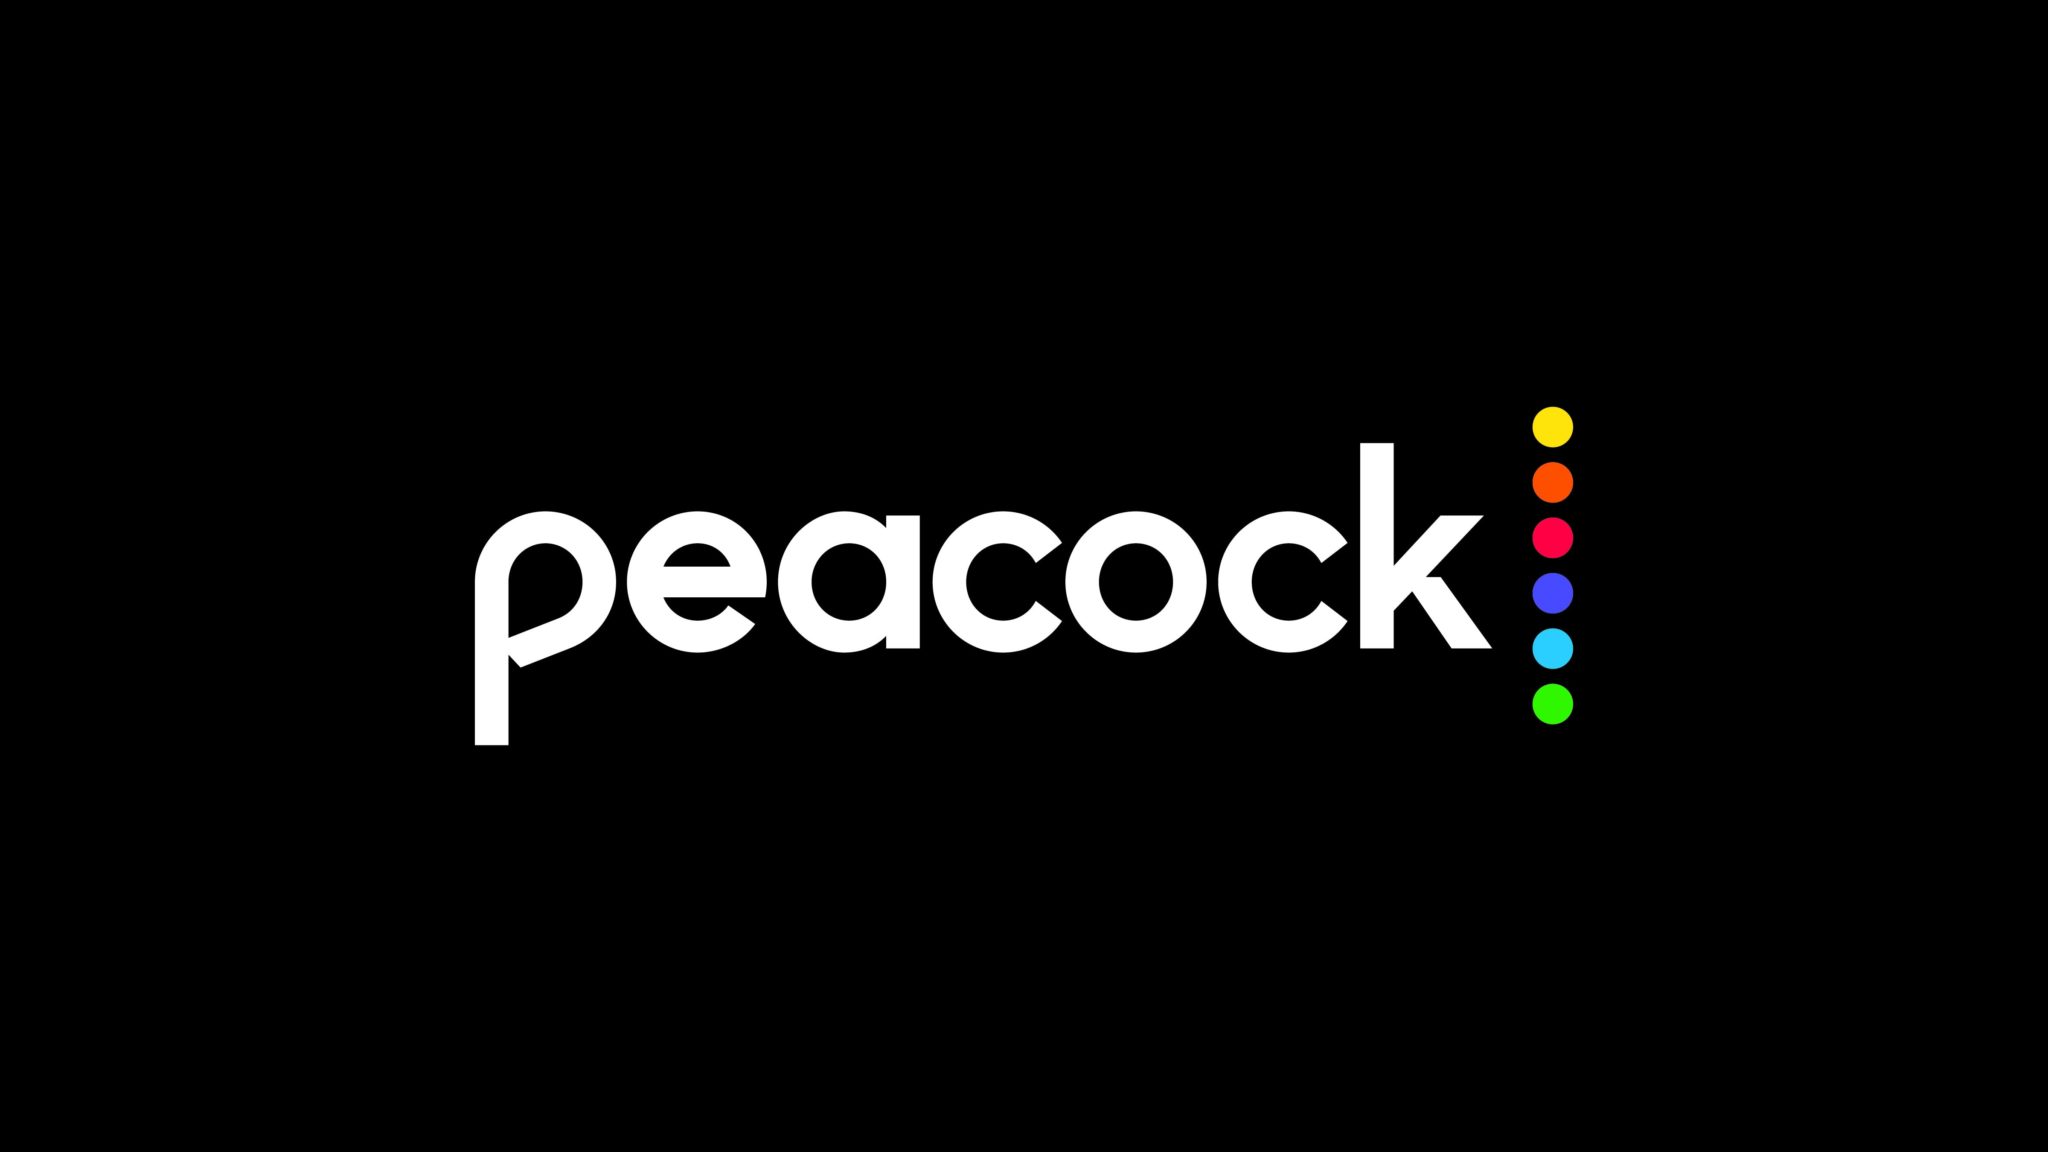 A&E Signs Deal to Stream Unscripted Series on Peacock